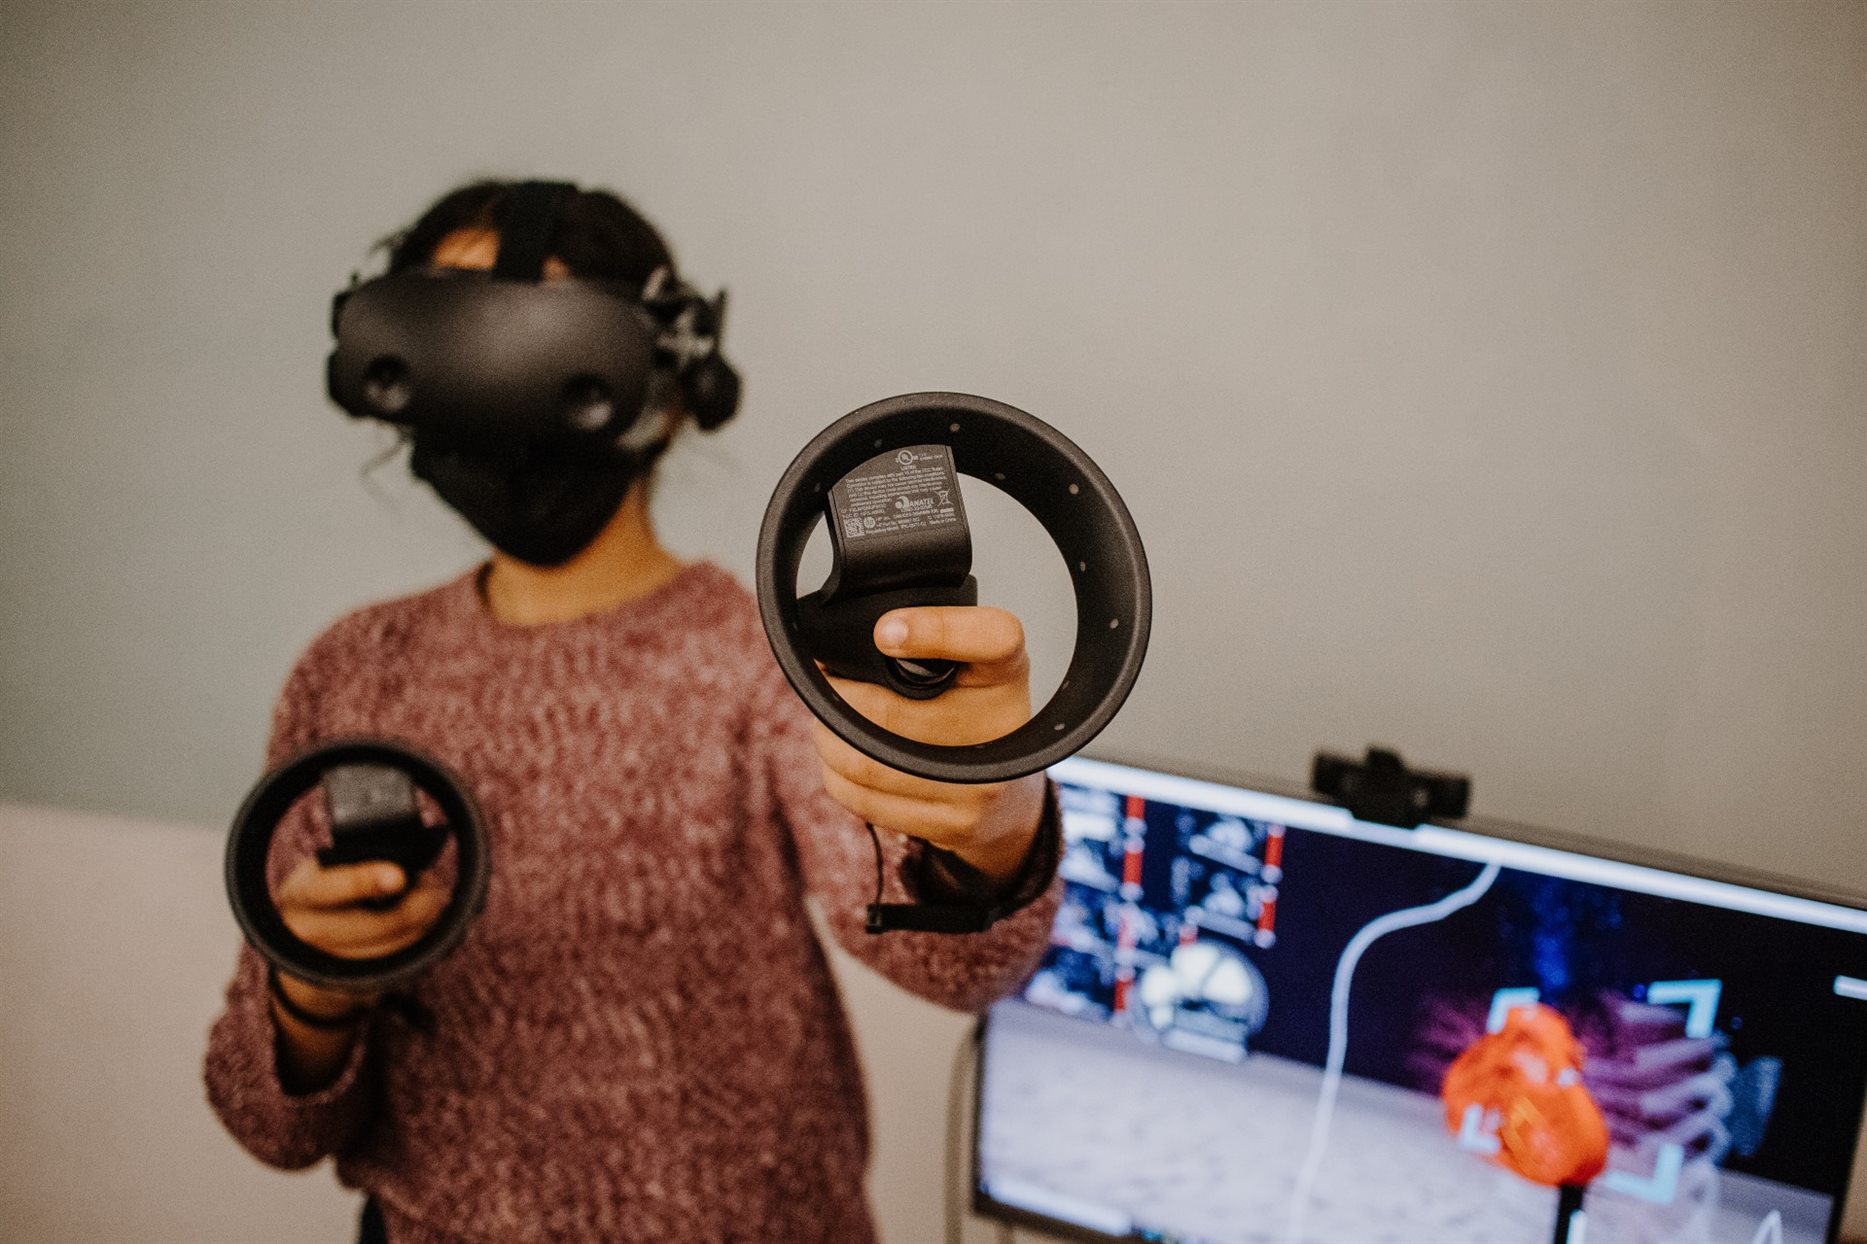 biomedical engineering students use a virtual reality headset to learn about the human body